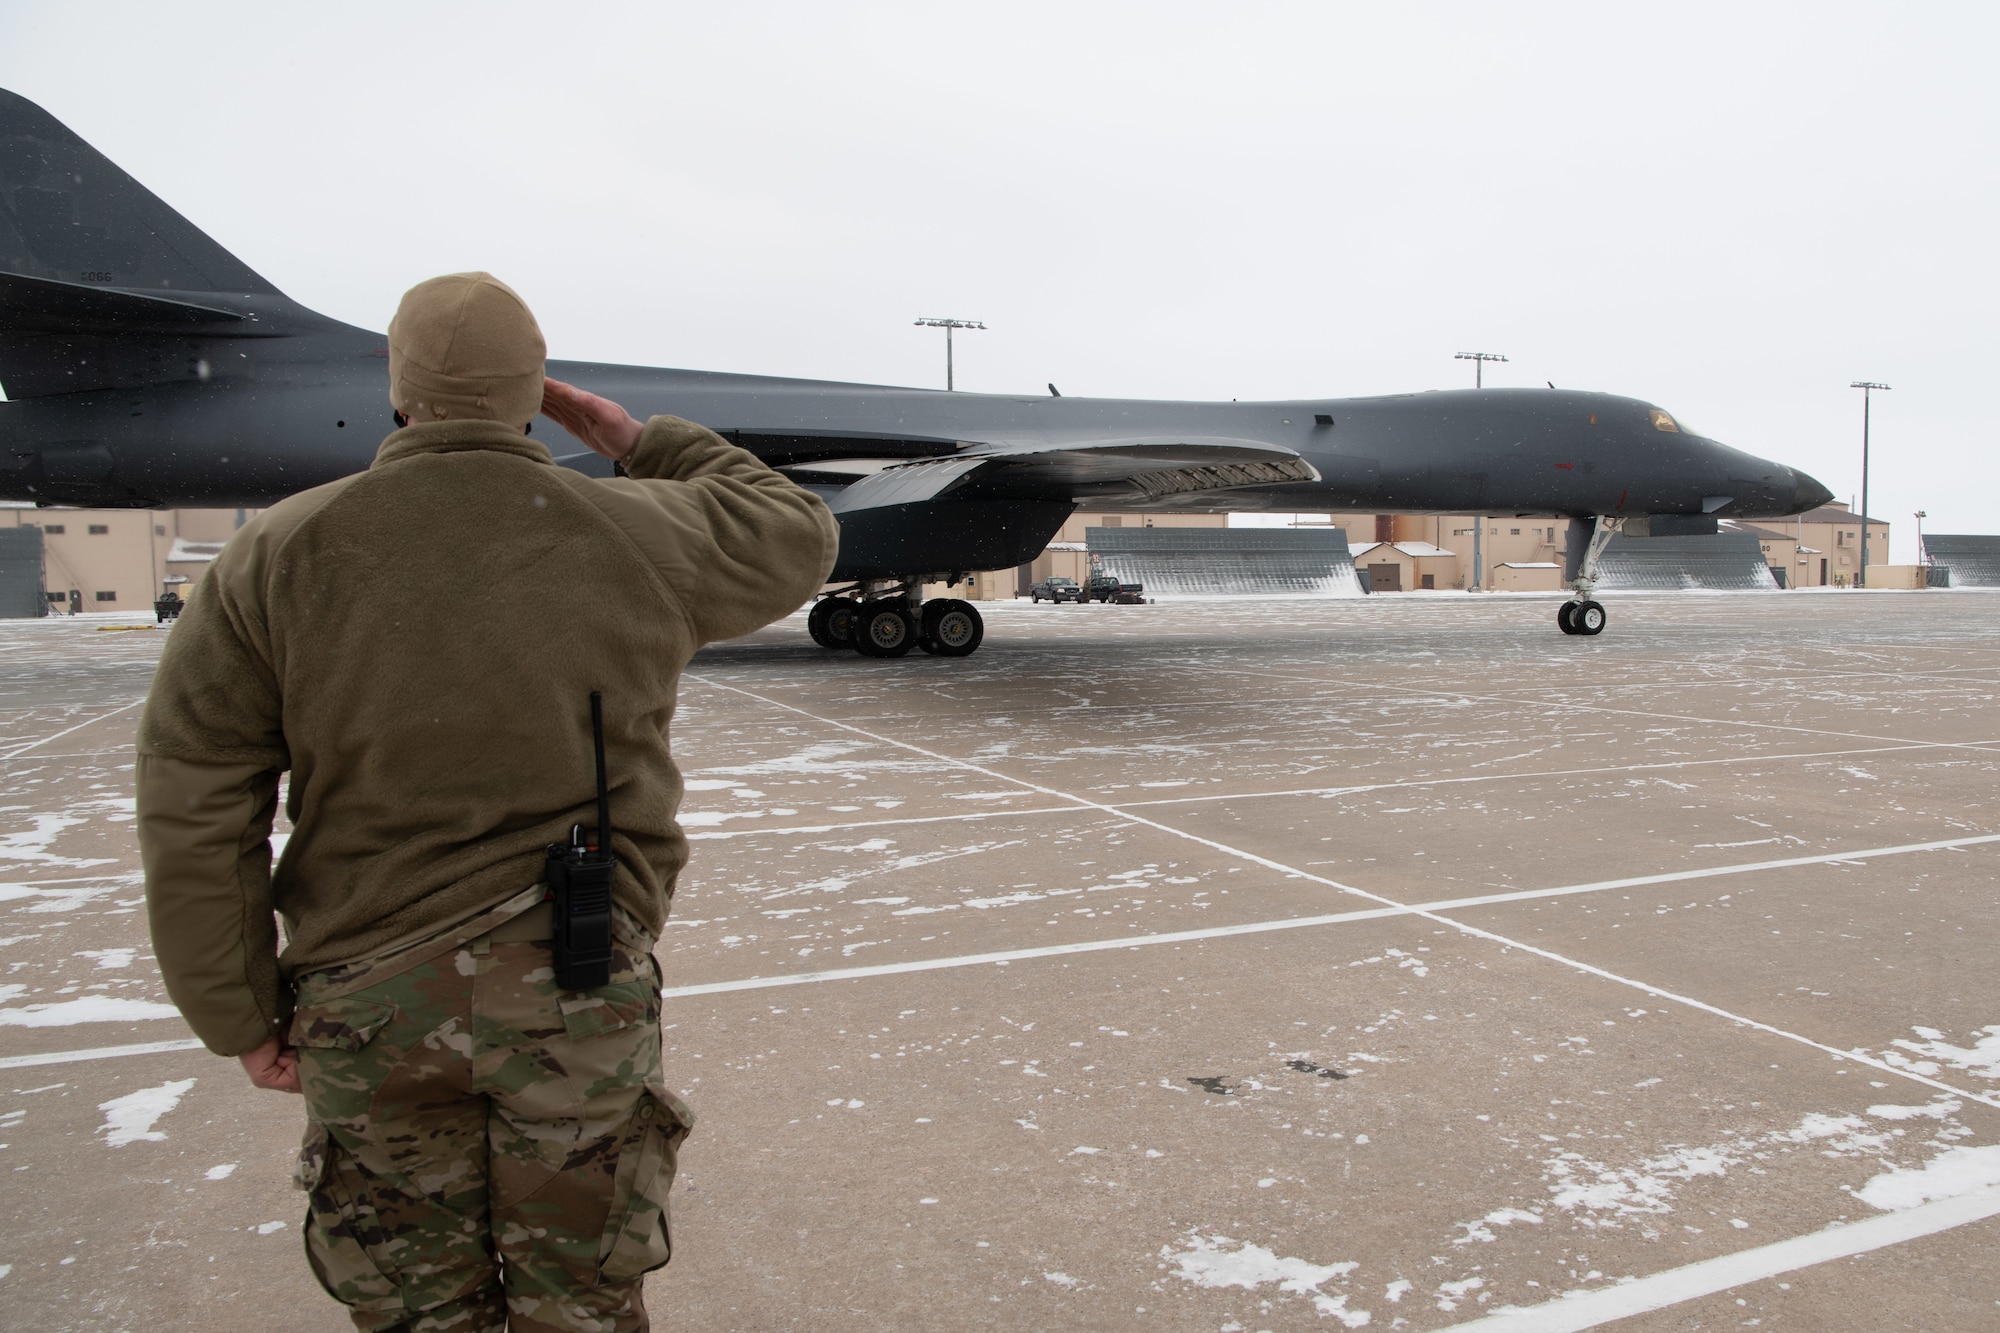 Master Sgt. David Jackson, the 28th Aircraft Maintenance Squadron production superintendent, salutes a B-1B Lancer that is being divested prior to its final launch from Ellsworth Air Force Base, S.D., Feb. 17, 2021. The divestiture of the B-1 is necessary in order for the Air Force to create an even more lethal, agile and sustainable force with a greater competitive edge in today’s fight. (U.S.  Air Force photo by Airman Jonah Fronk)